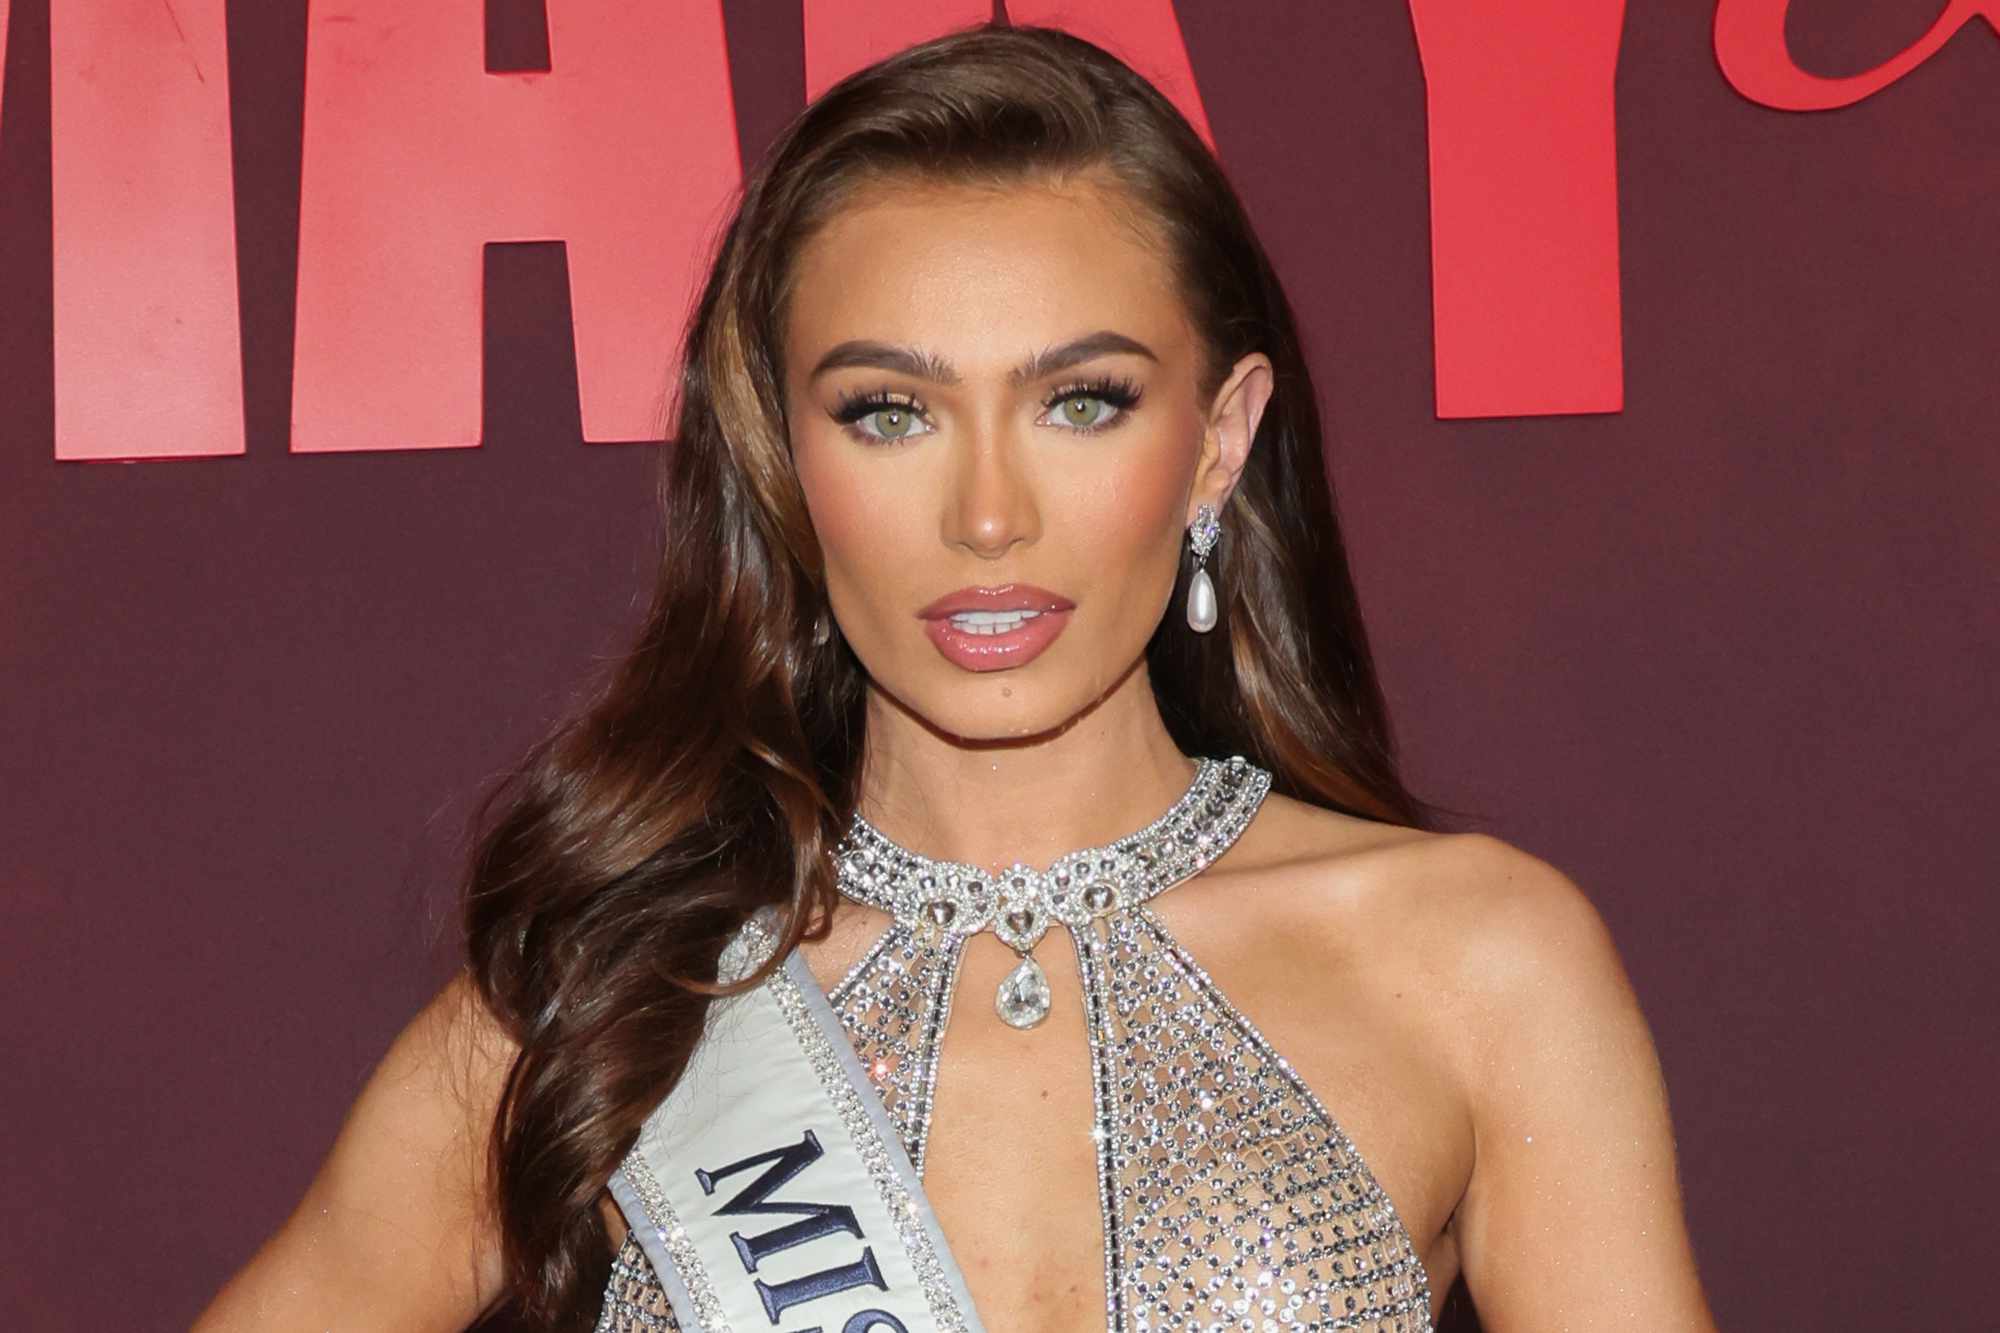 Noelia Voigt 'Overwhelmed' by Support After Resigning as Miss USA, Will Focus on Being 'Advocate for Mental Health Awareness' (Exclusive)